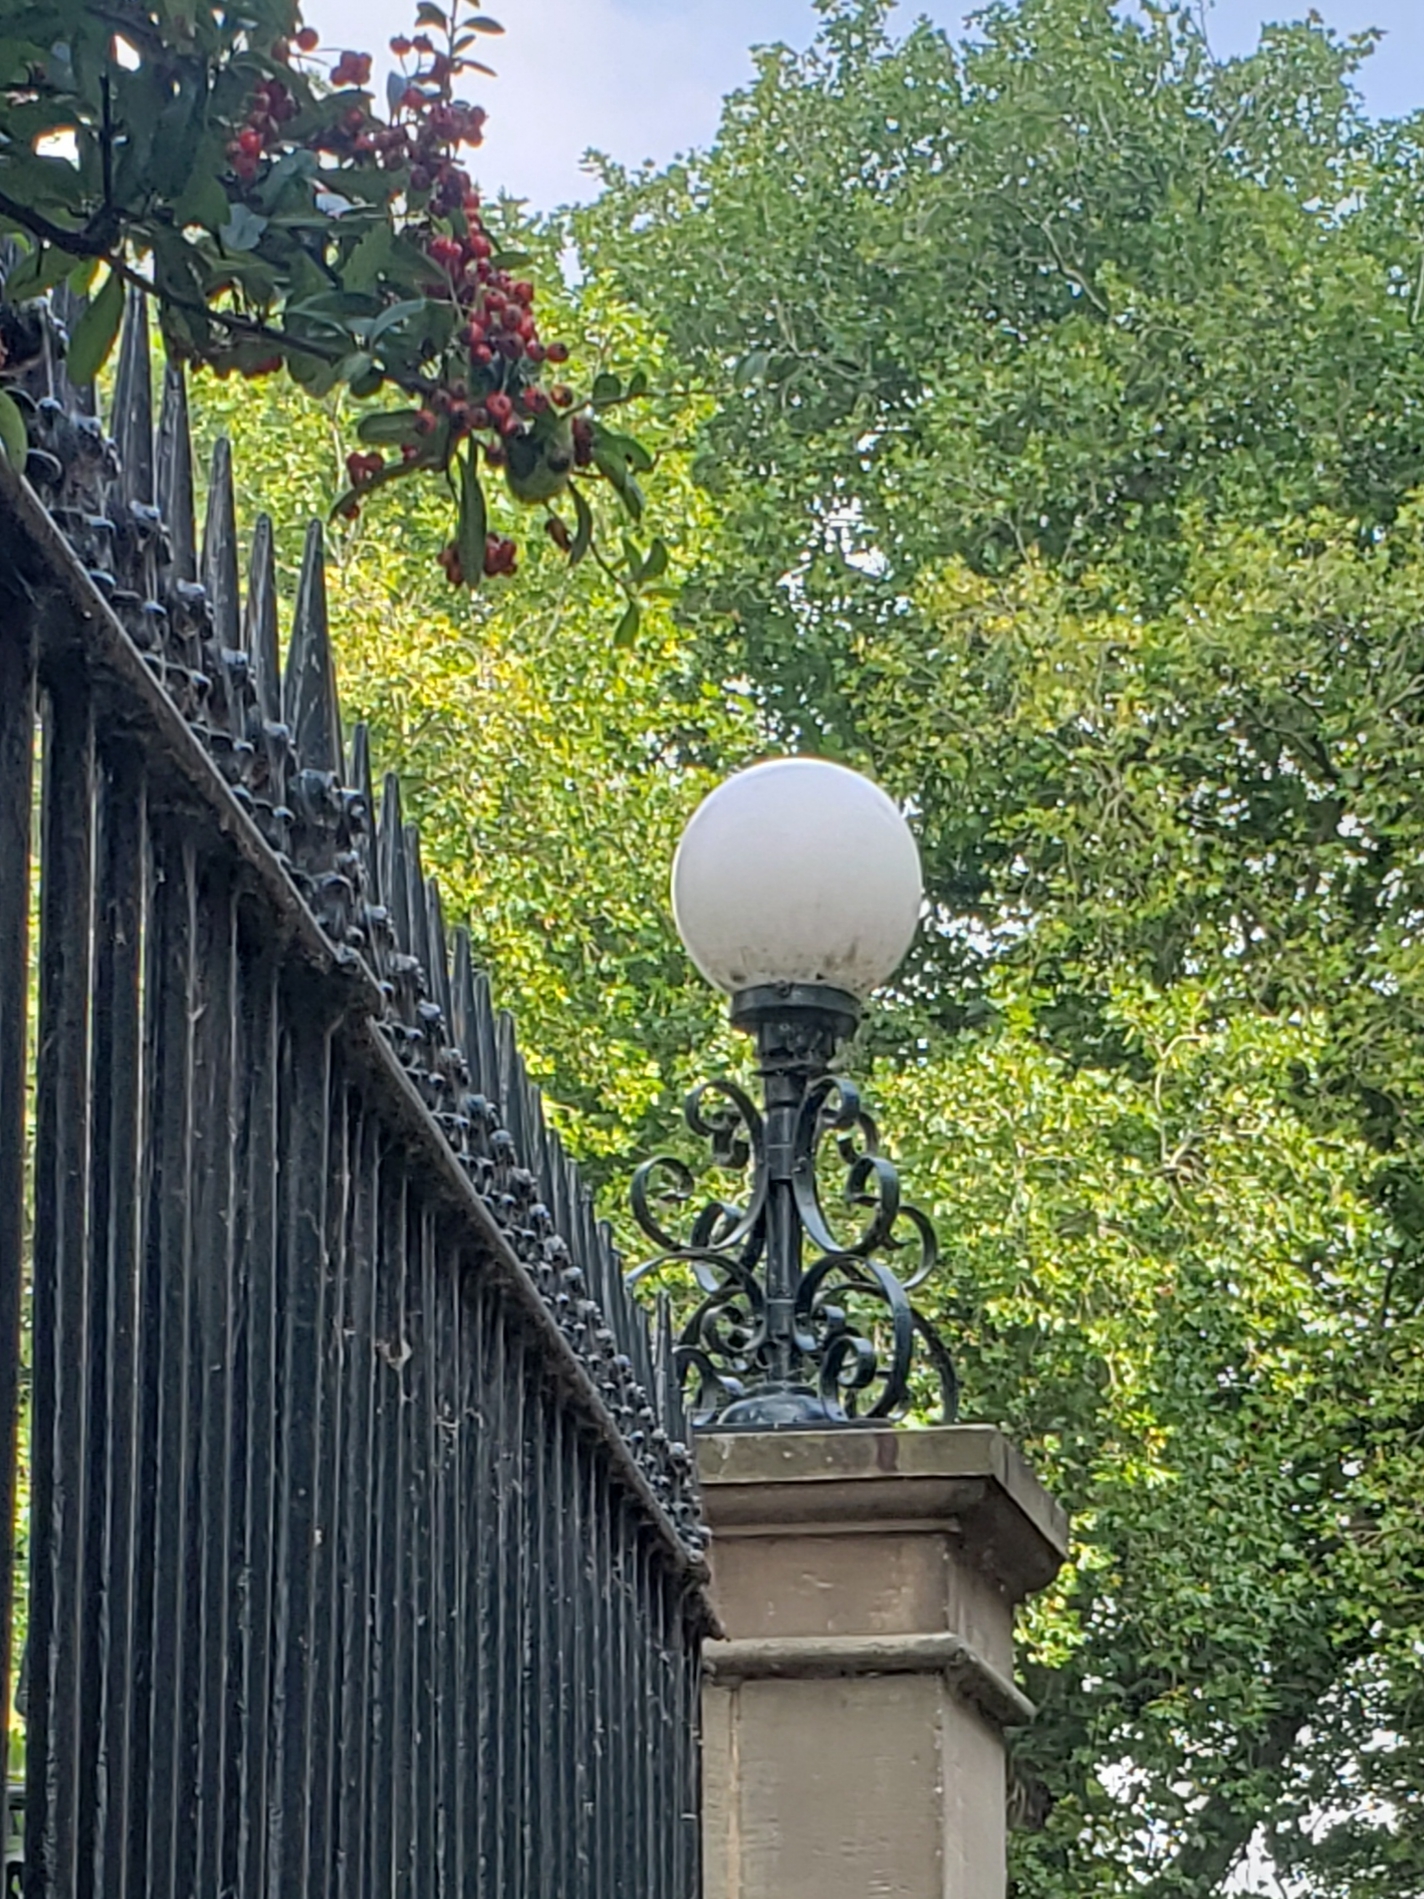 Any bright ideas where you might see this lamplight?